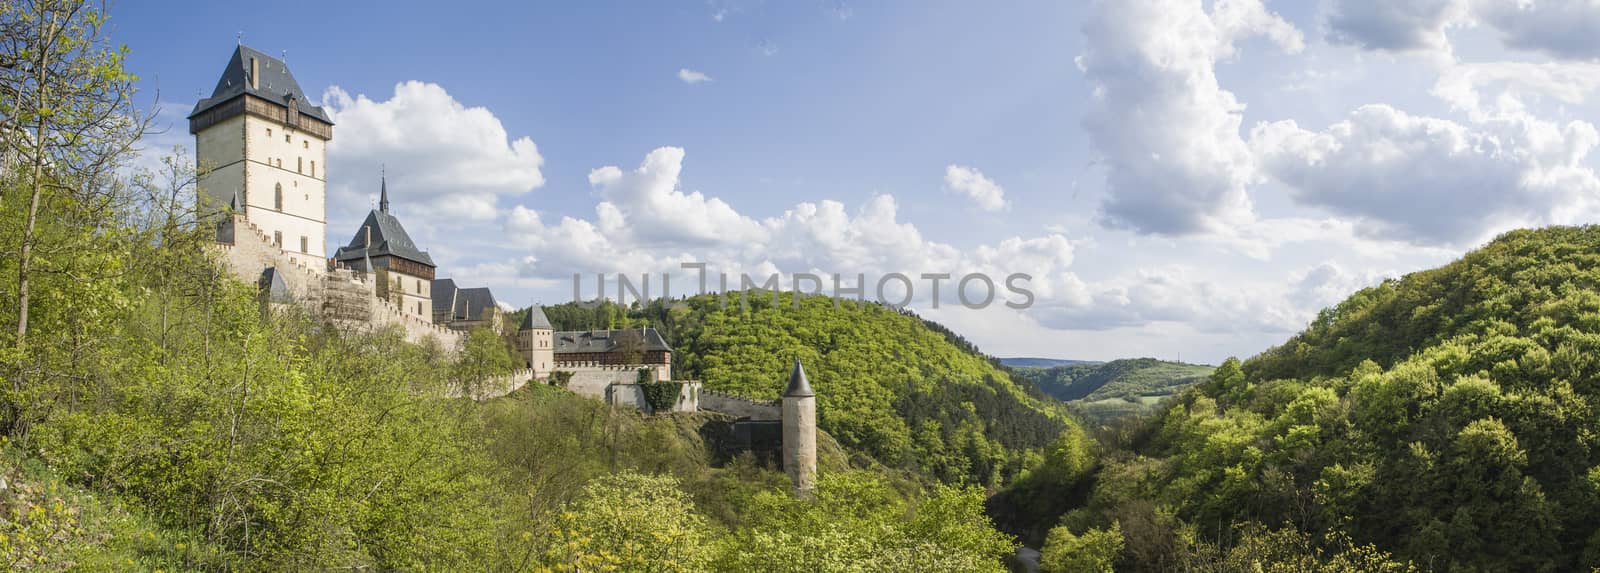 Karlstejn castle in summer, panoramatic view

